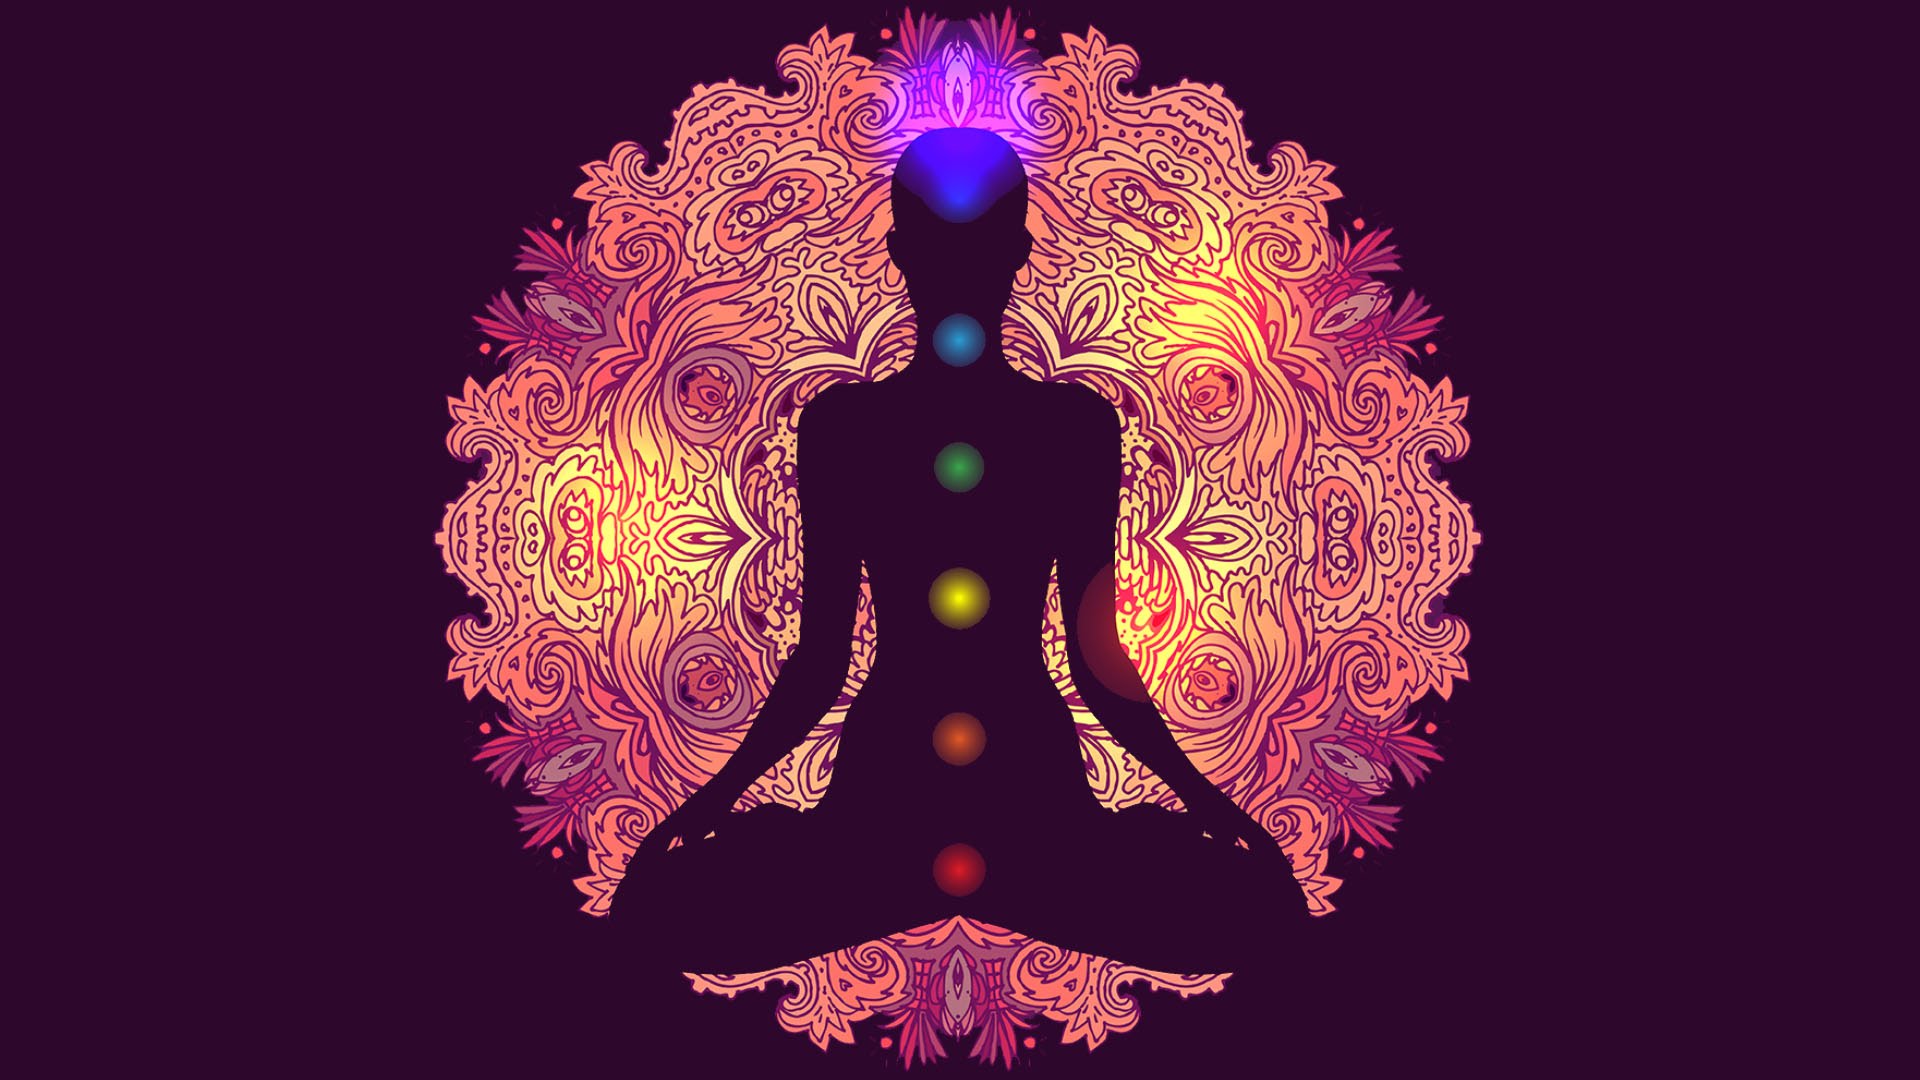 What are the uses of chakras in Buddhism? 14